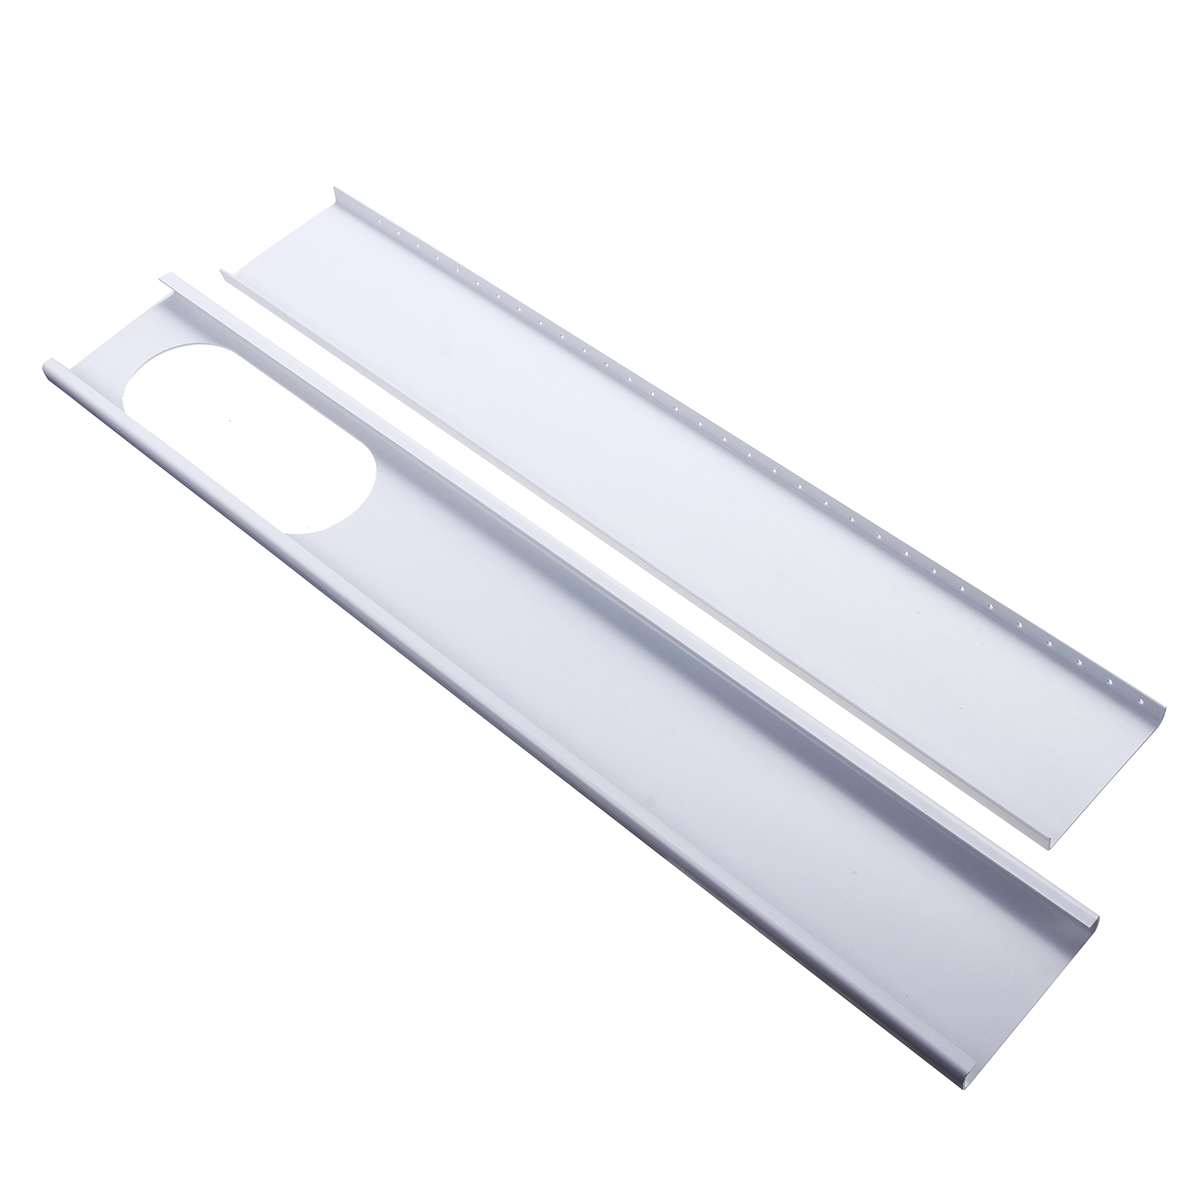 2pcs-675cm-120cm-Adjustable-Window-Slide-Plate-Air-Conditioner-Wind-Shield-for-Air-Conditioner-1716034-2